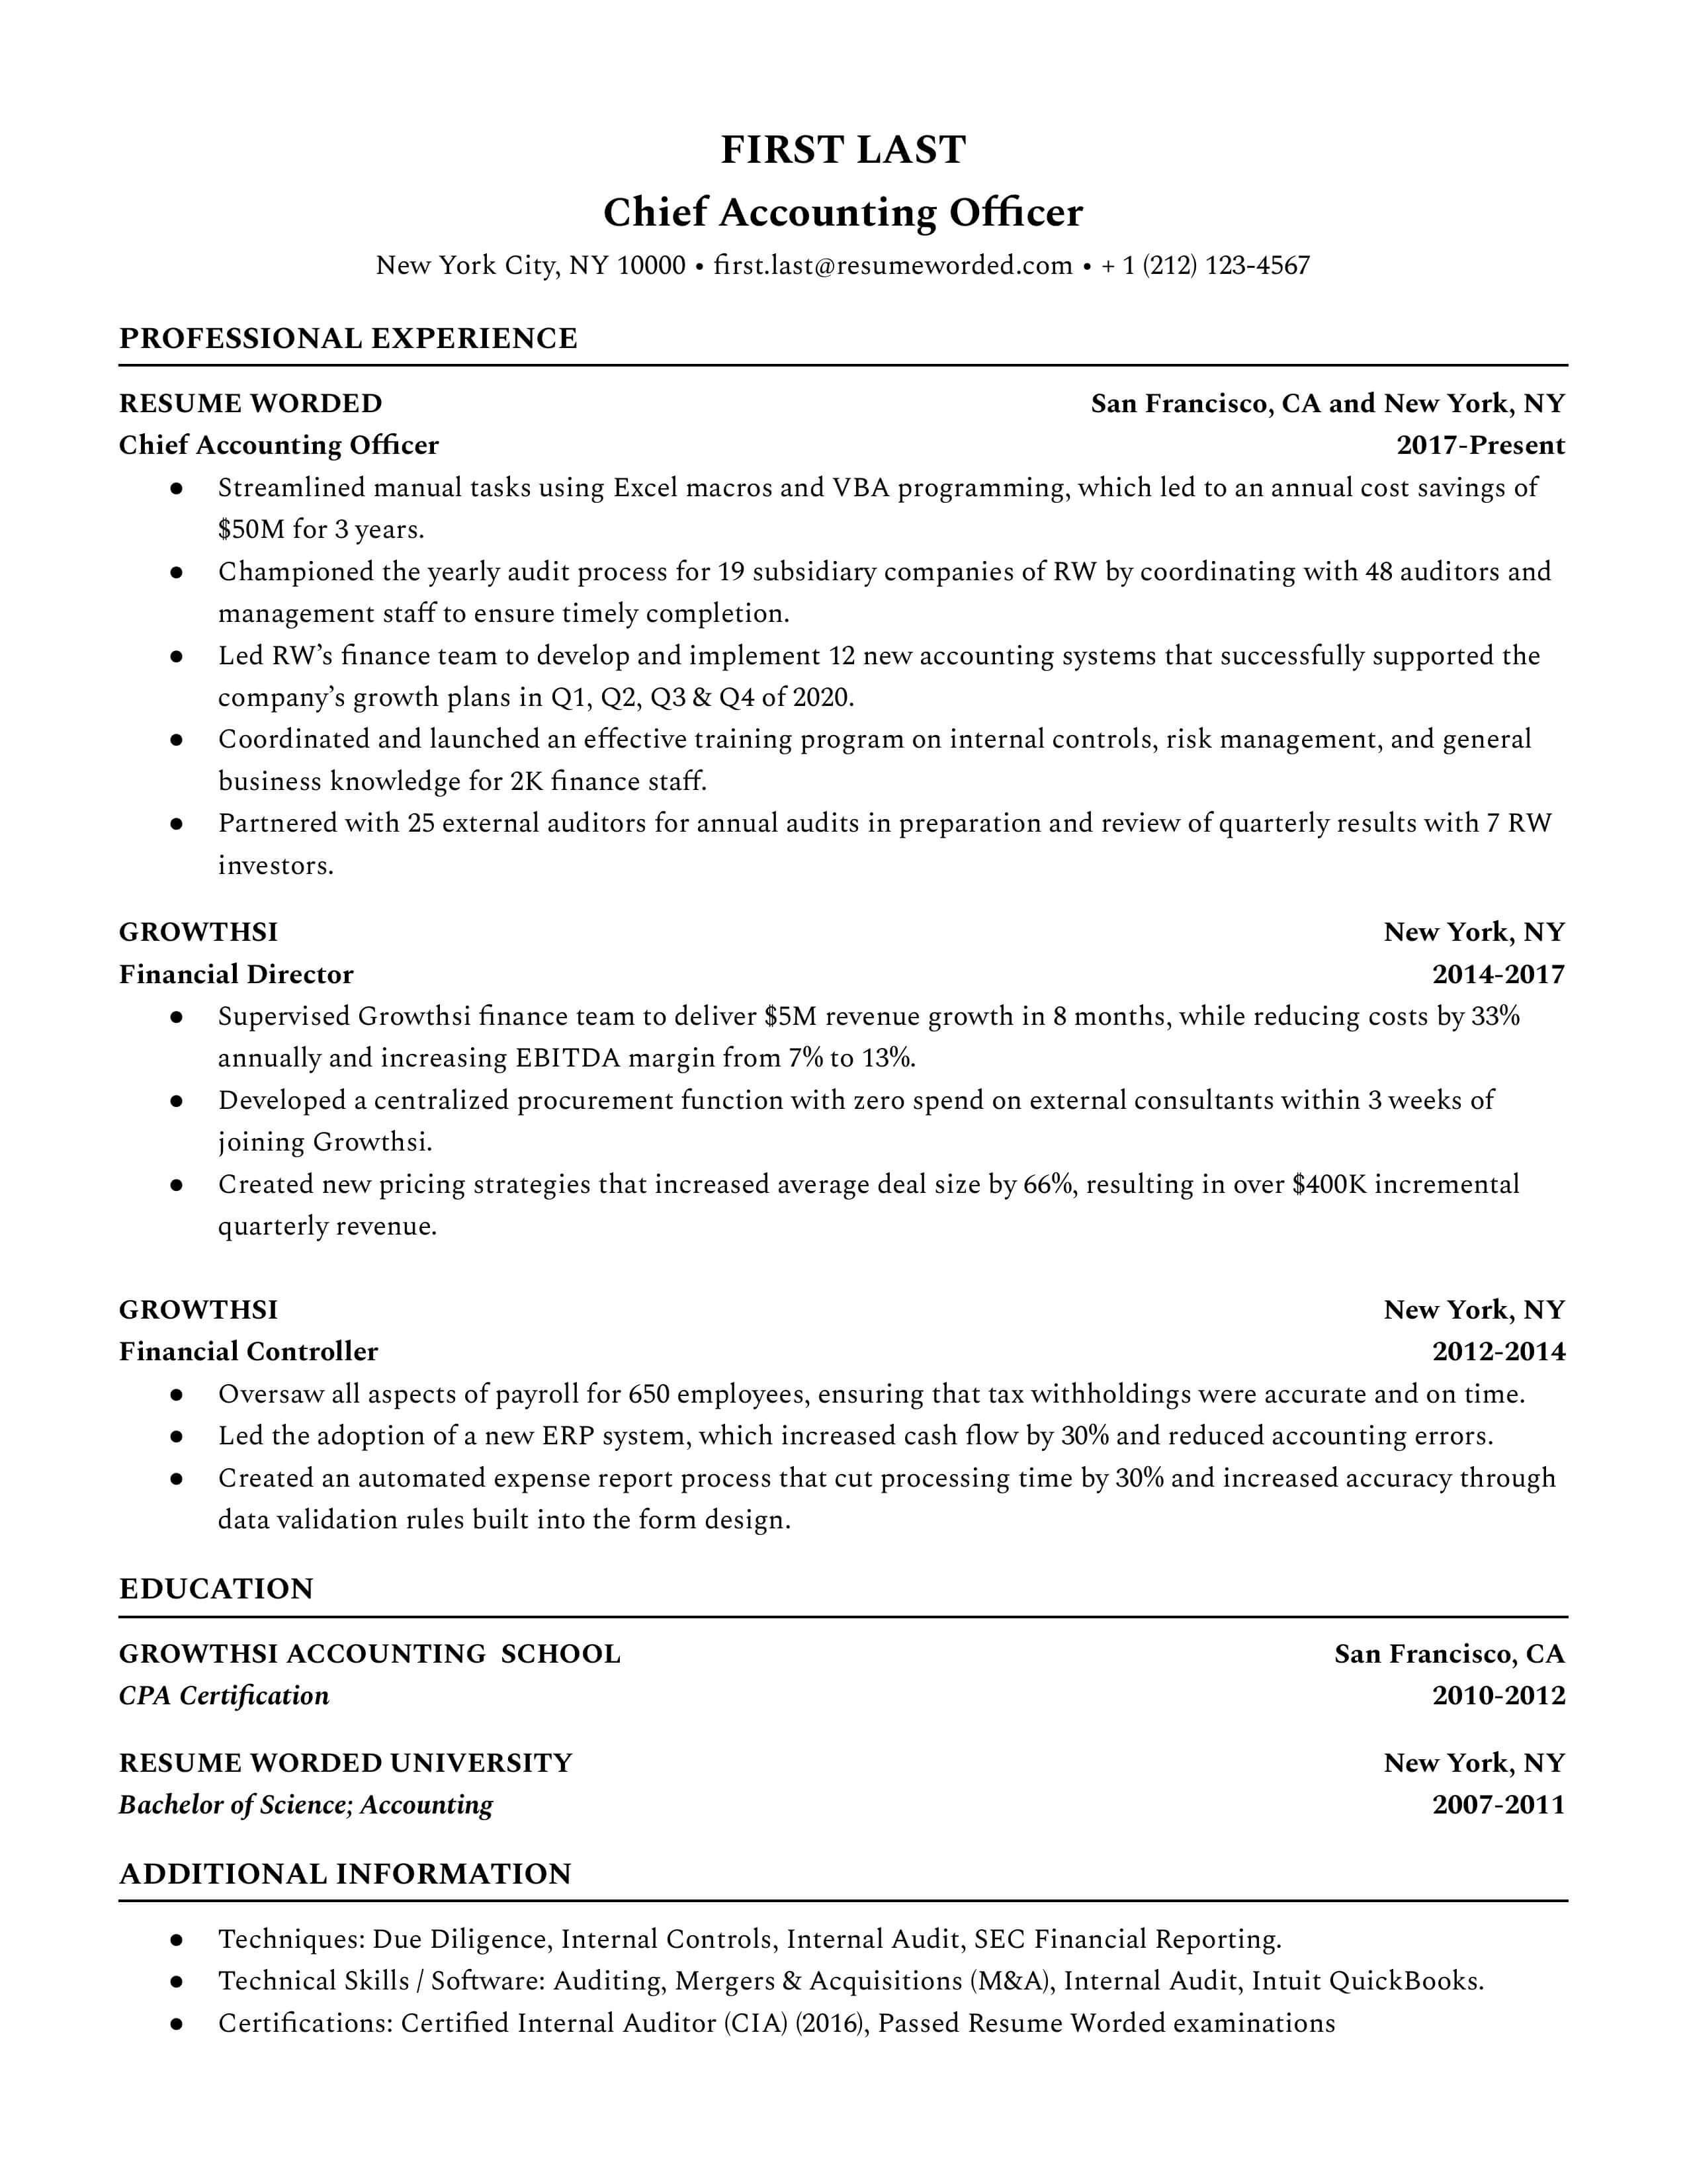 A chief accounting officer resume sample that highlights the applicant’s career progression and accounting certifications.